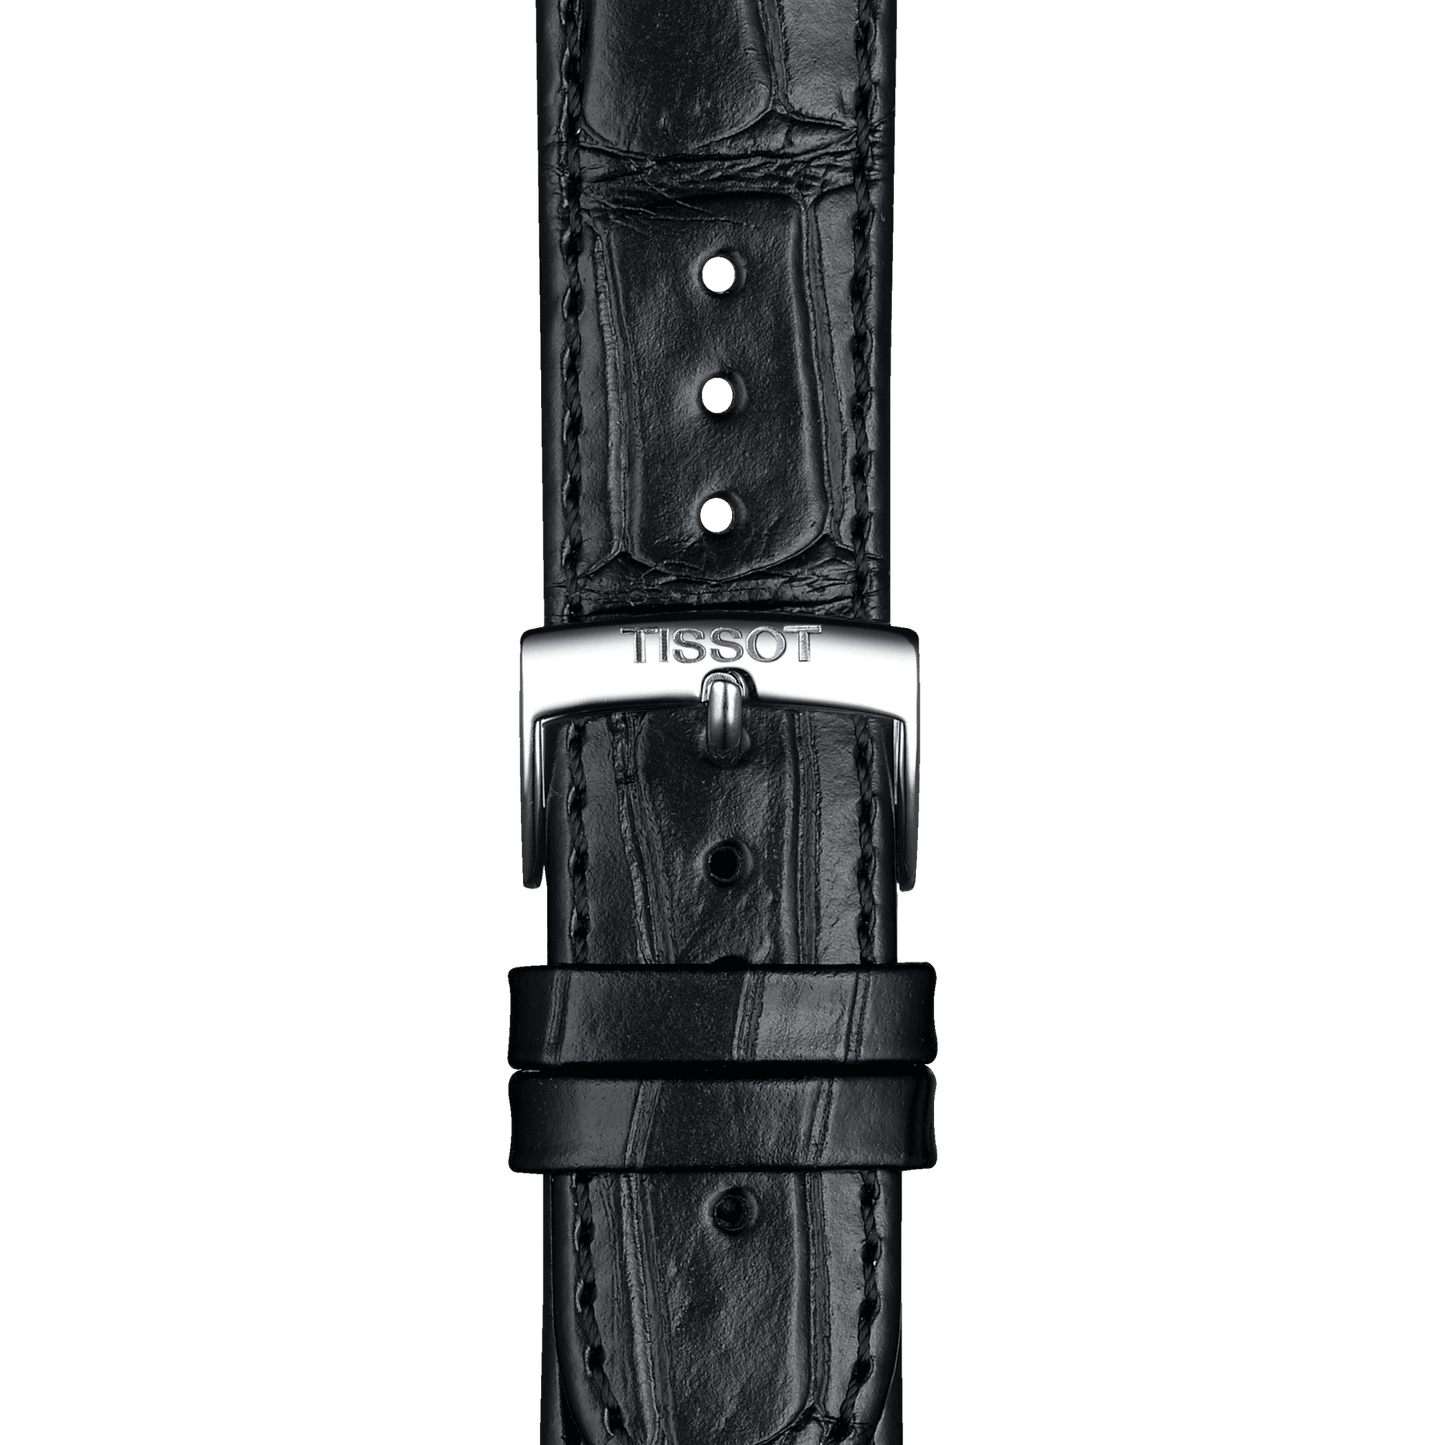 Tissot Official Leather Strap - Lugs 20 mm